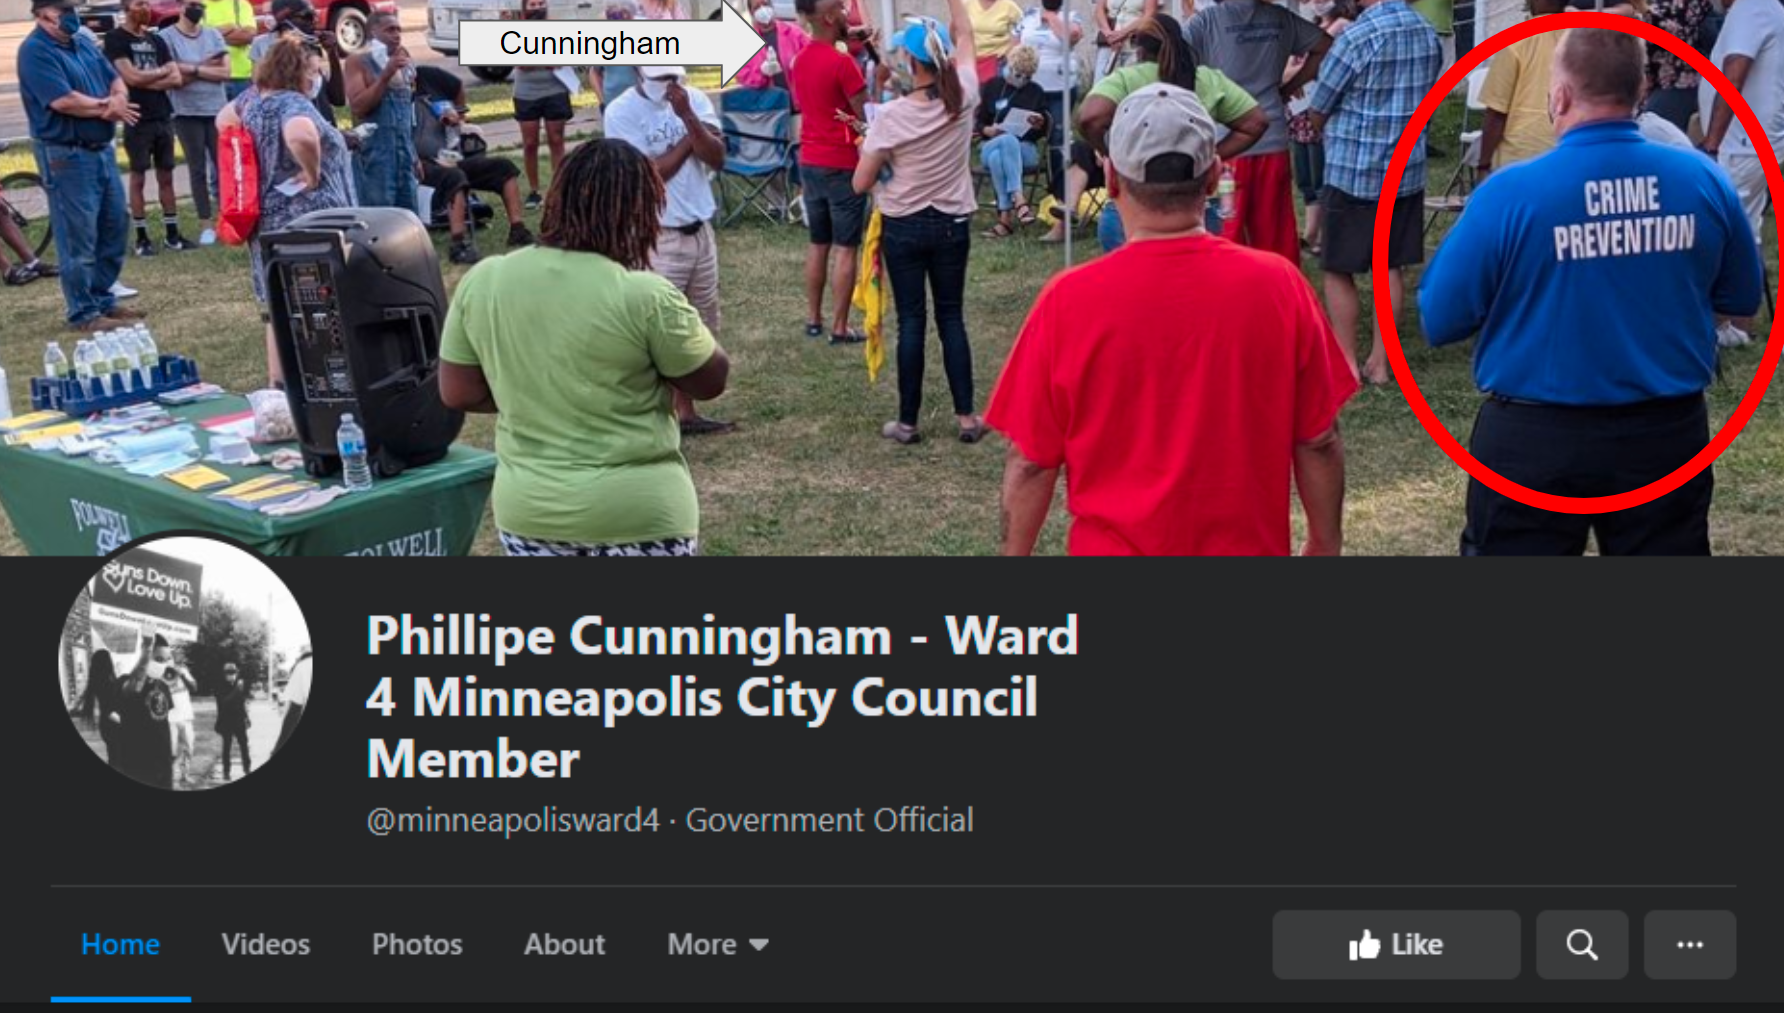 Cunningham appears here, speaking to a small group as an apparent bodyguard stands watch. (Image source: Facebook/@minneapolisward4)